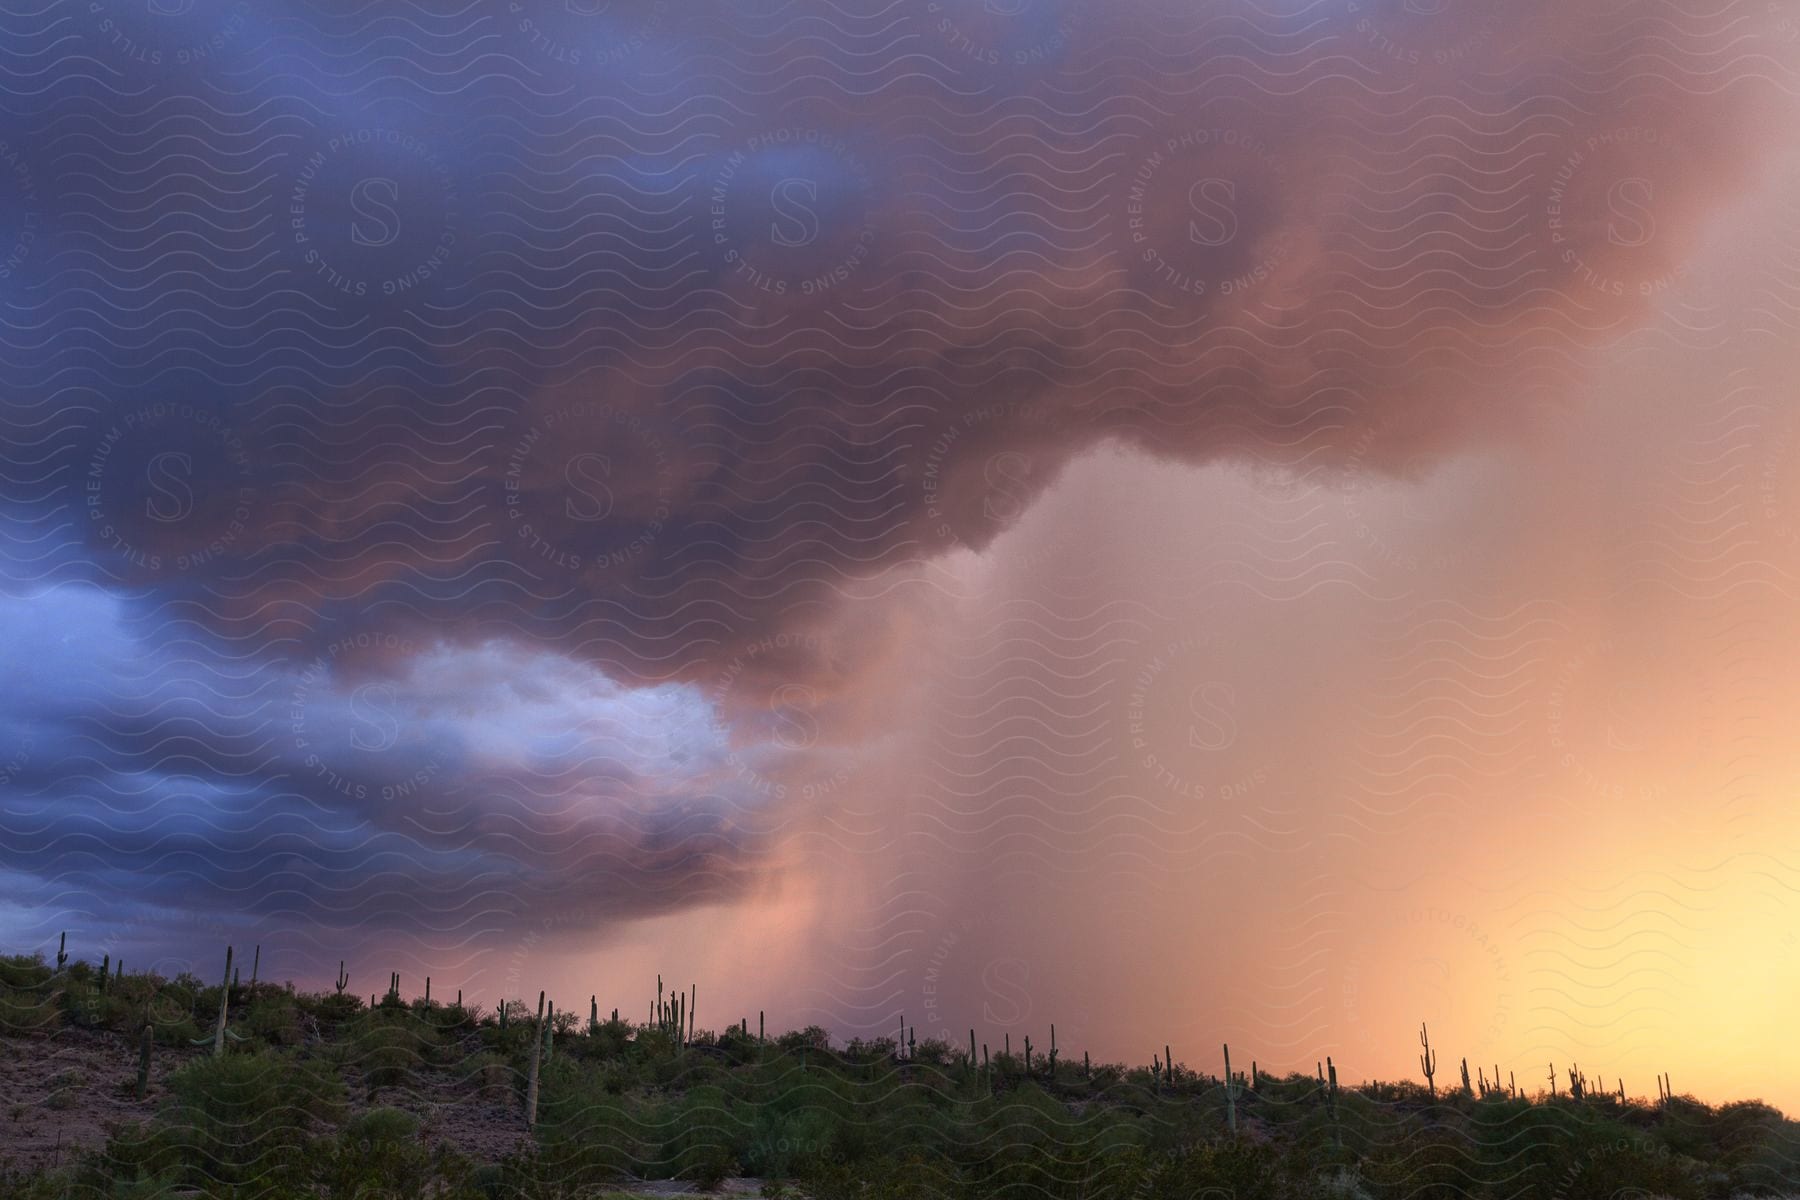 Rain pours on cactus and plants as dark storm clouds move over the desert hillside